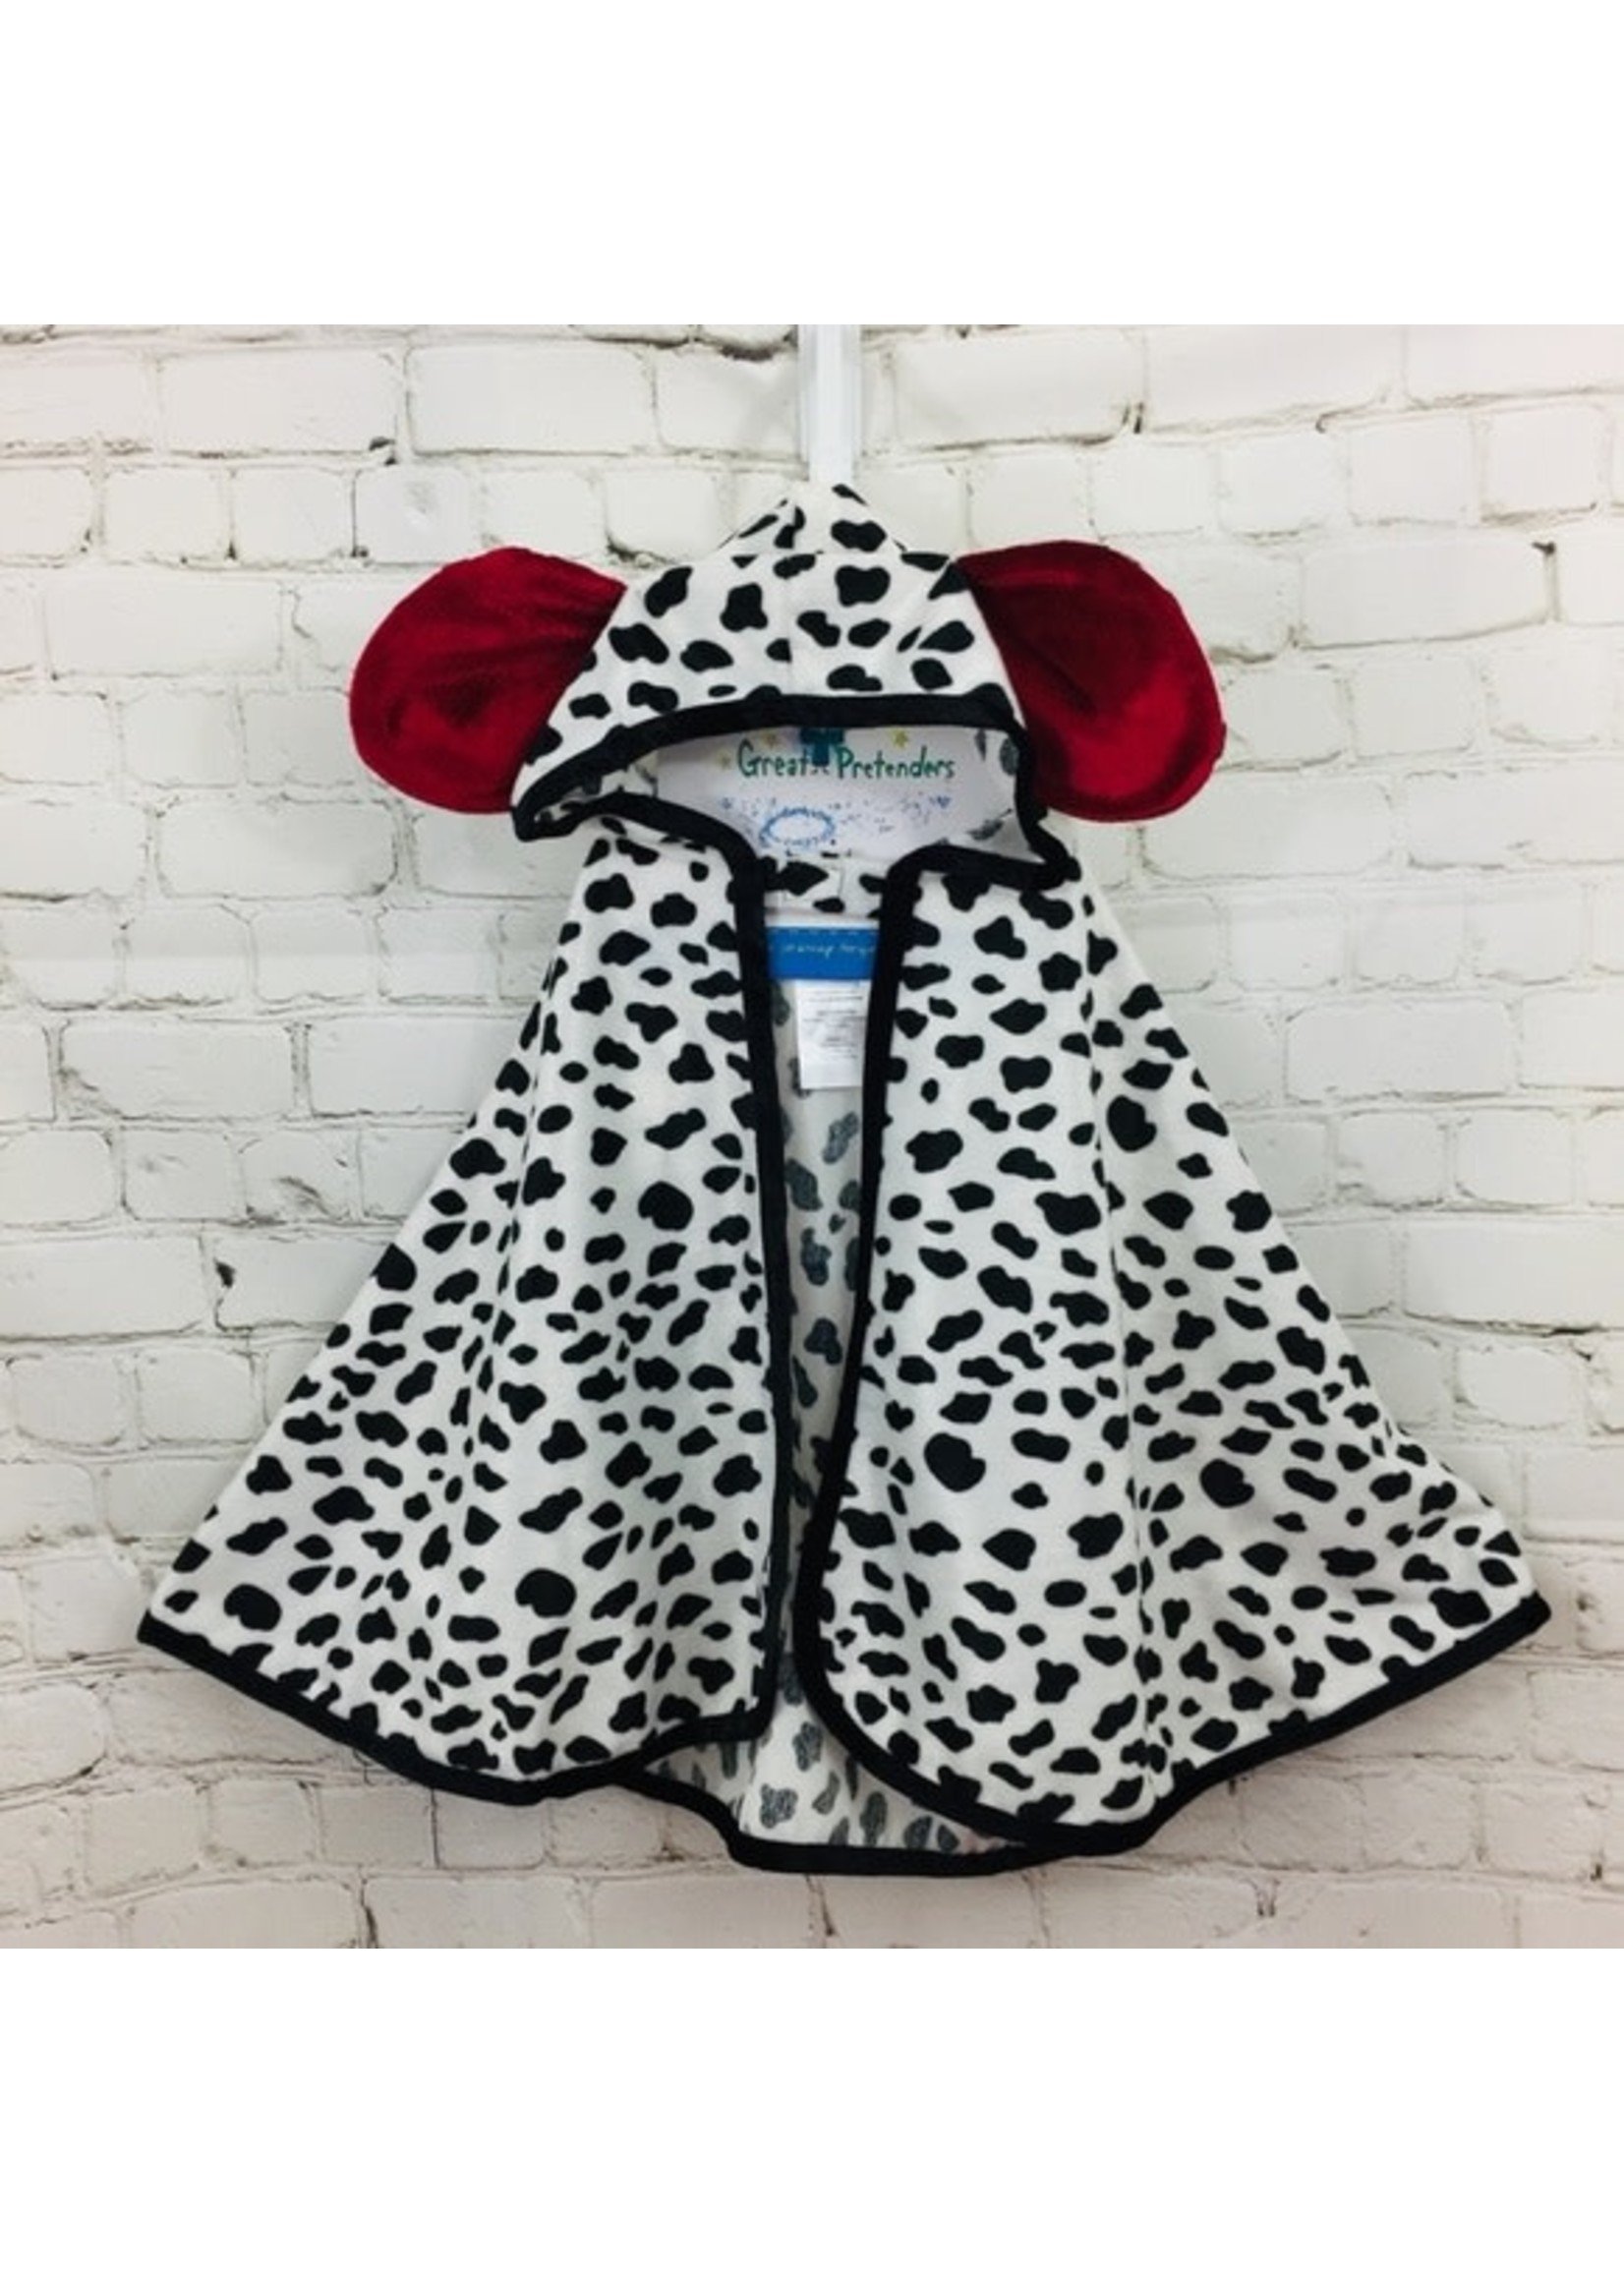 Great Pretenders Toddler Capes